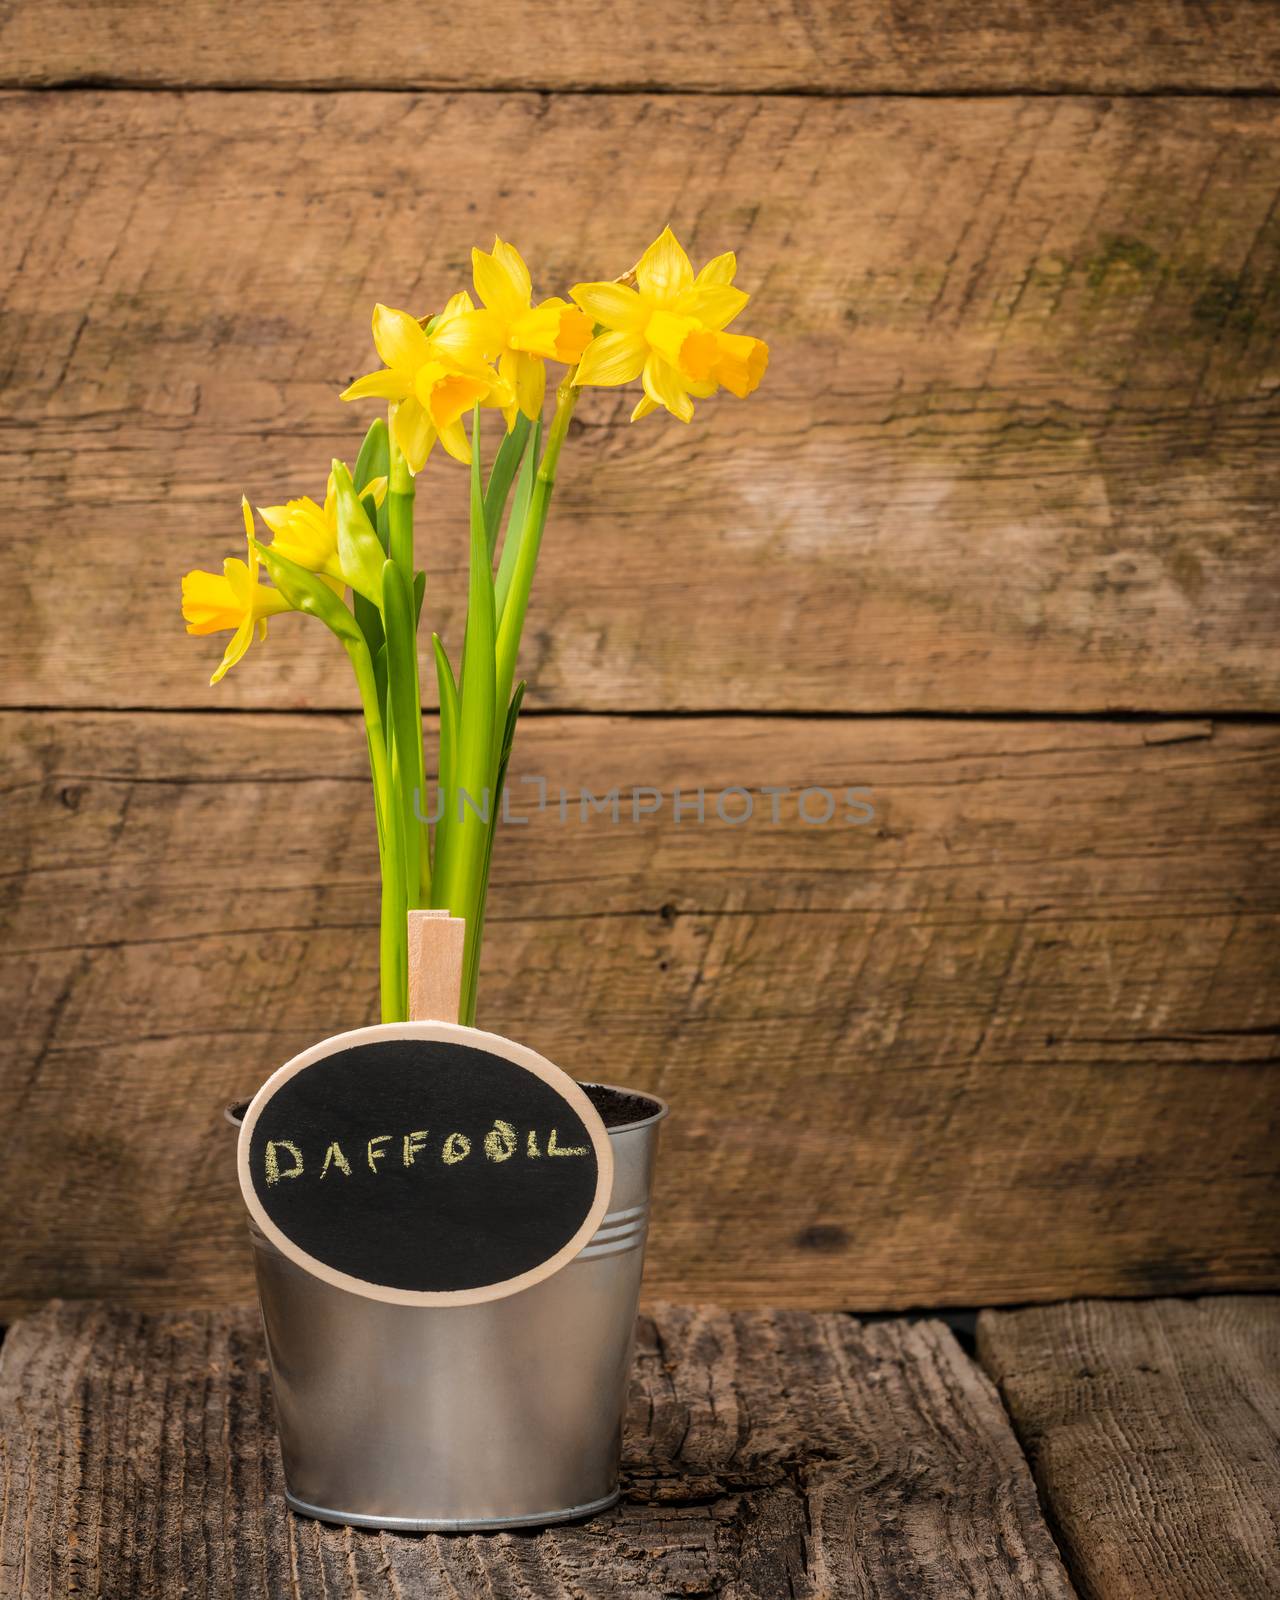 Daffodil and Sign by billberryphotography